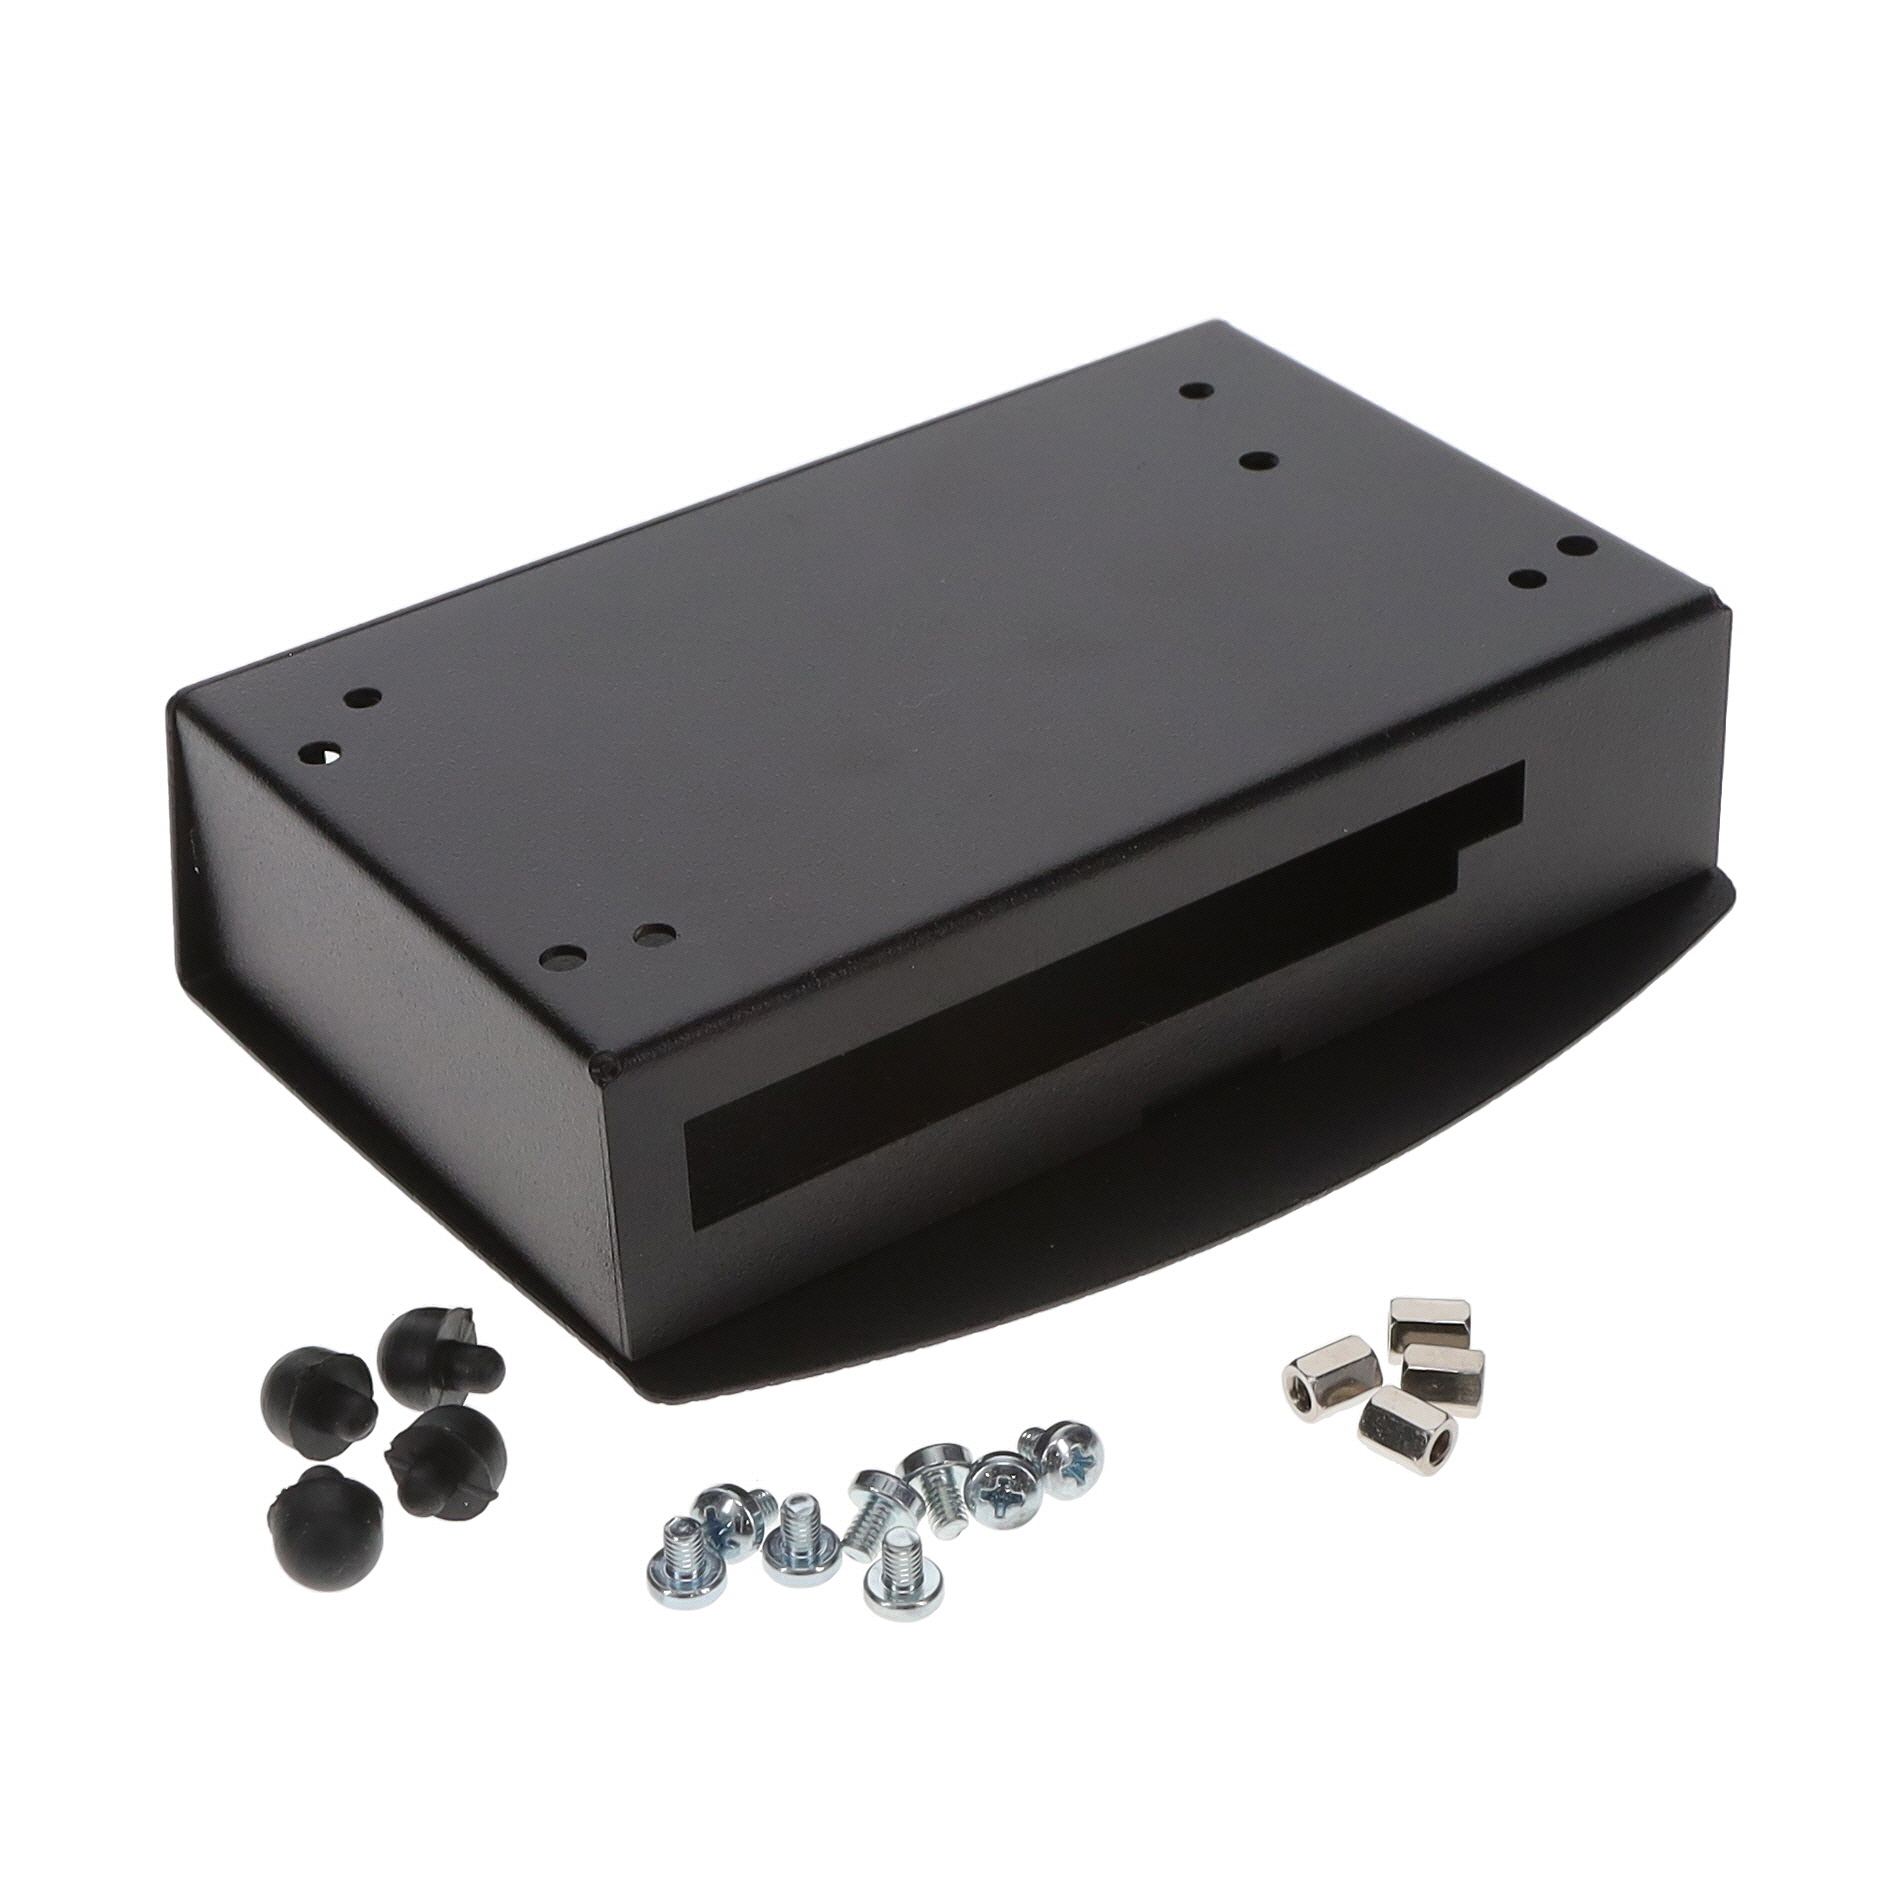 the part number is BOX-AGONLIGHT2-BLACK